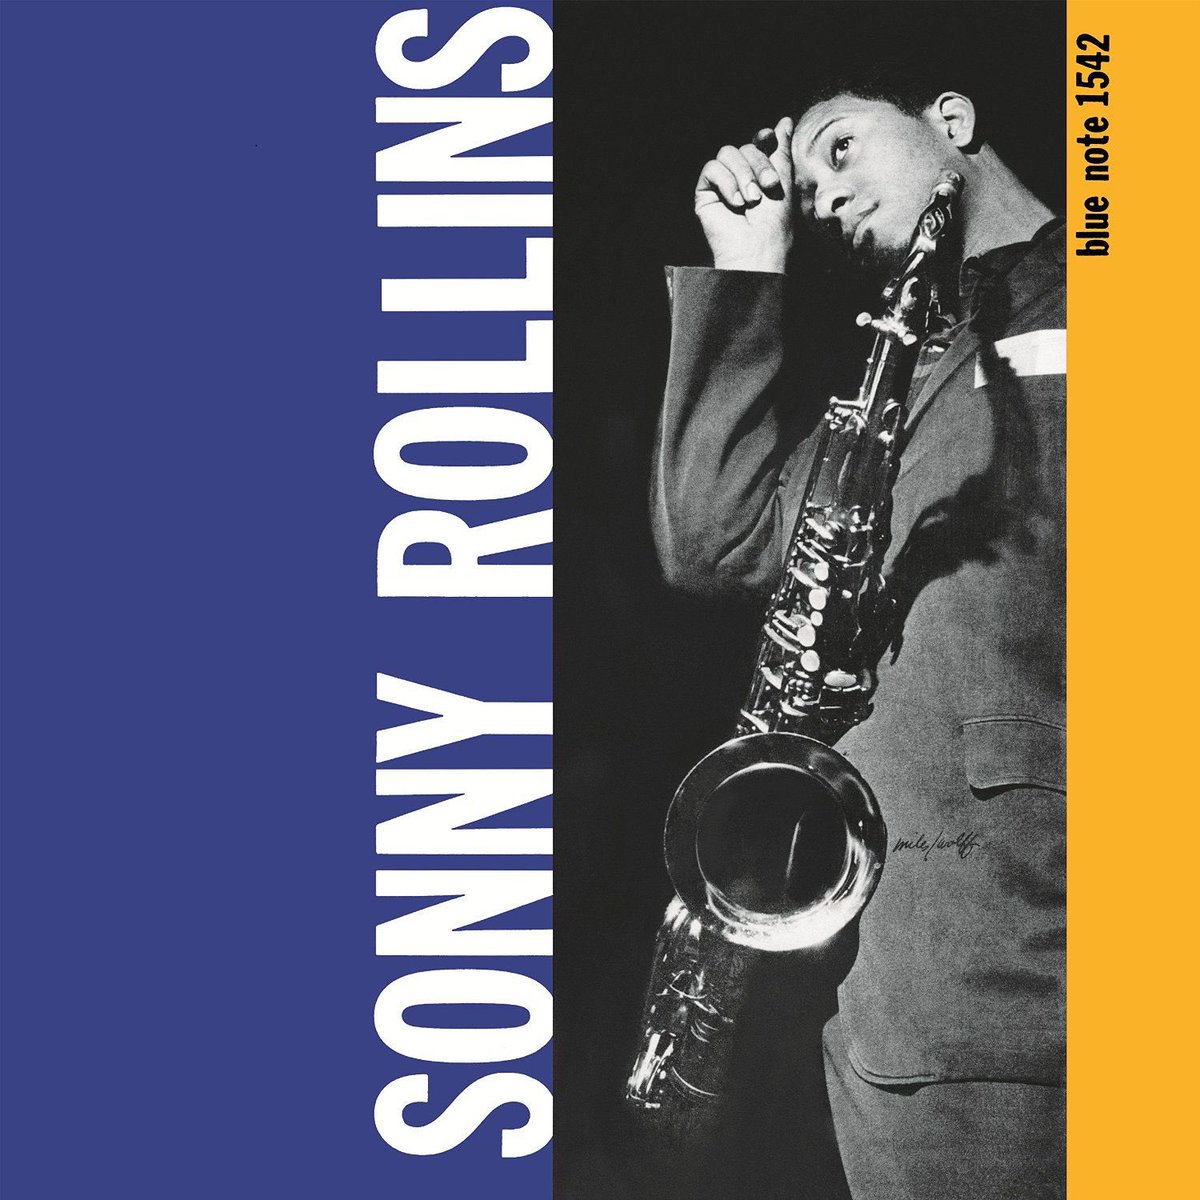 🔷 Blue Note Daily 🔷

Another day, another blue note to share… have a wonderful weekend everyone! 

Stop 16: BLP 1542: Sonny Rollins Volume 1 (1957)

#DonaldByrd: trumpet 🎺 
#SonnyRollins: tenor sax 🎷 
#WyntonKelly: piano 🎹 
#GeneRamey: bass 🎸
#MaxRoach: drums 🥁

Recorded…